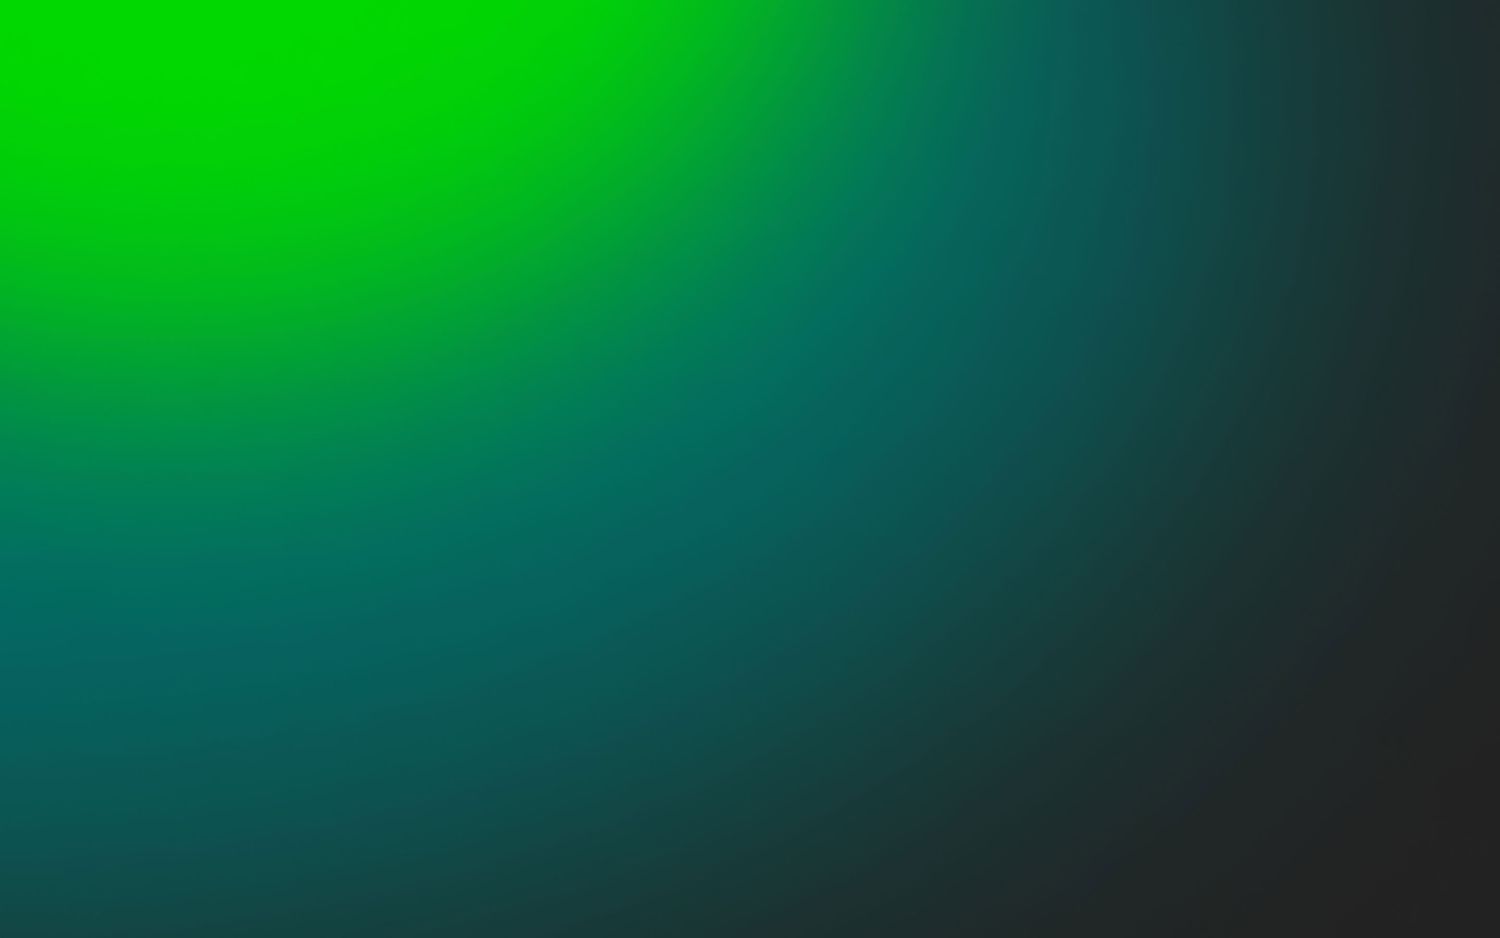 Green and black gradient